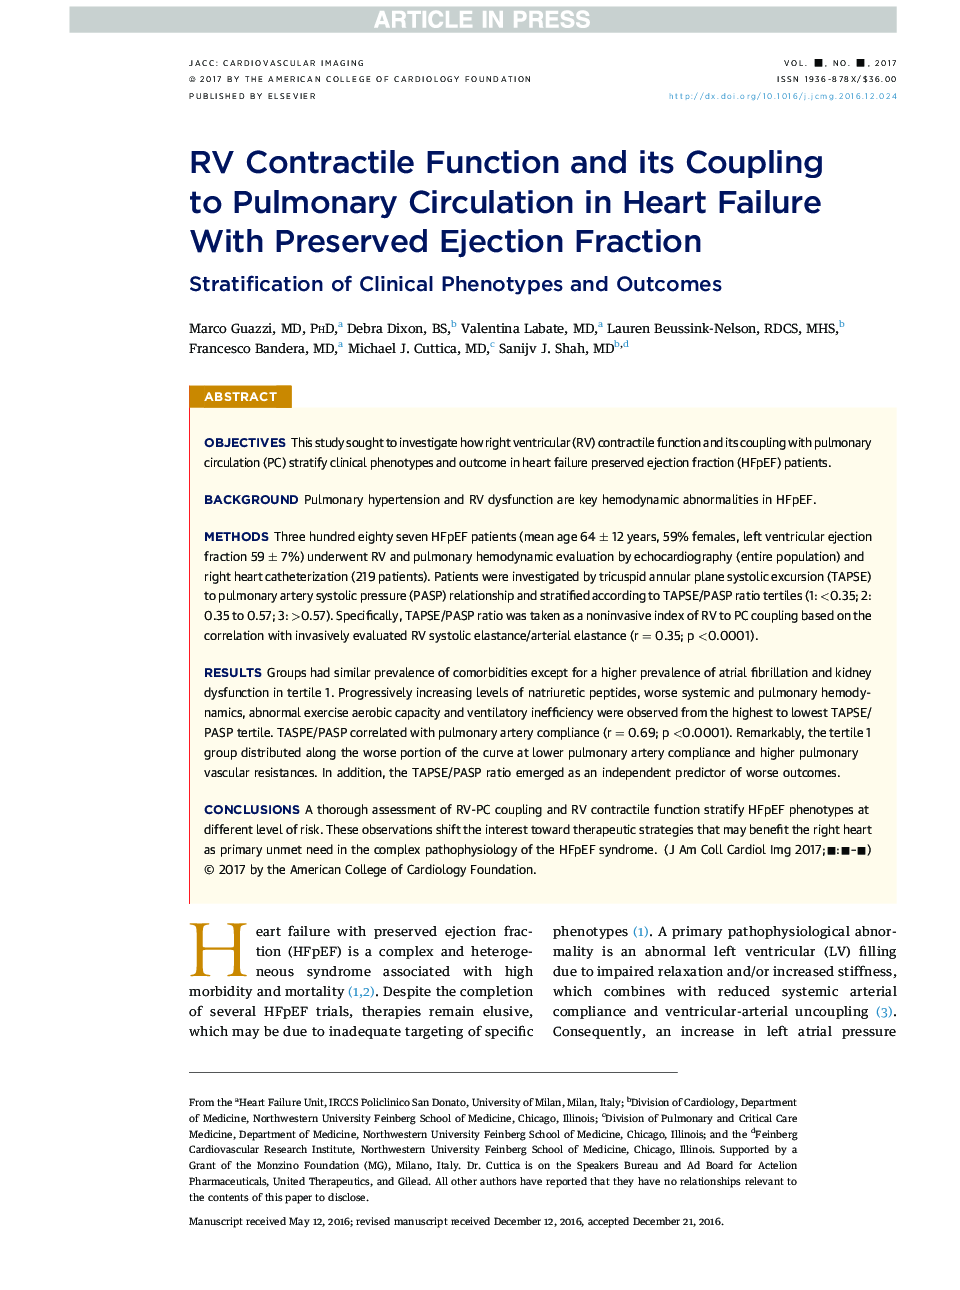 RV Contractile Function and its Coupling to Pulmonary Circulation in Heart Failure With PreservedÂ EjectionÂ Fraction